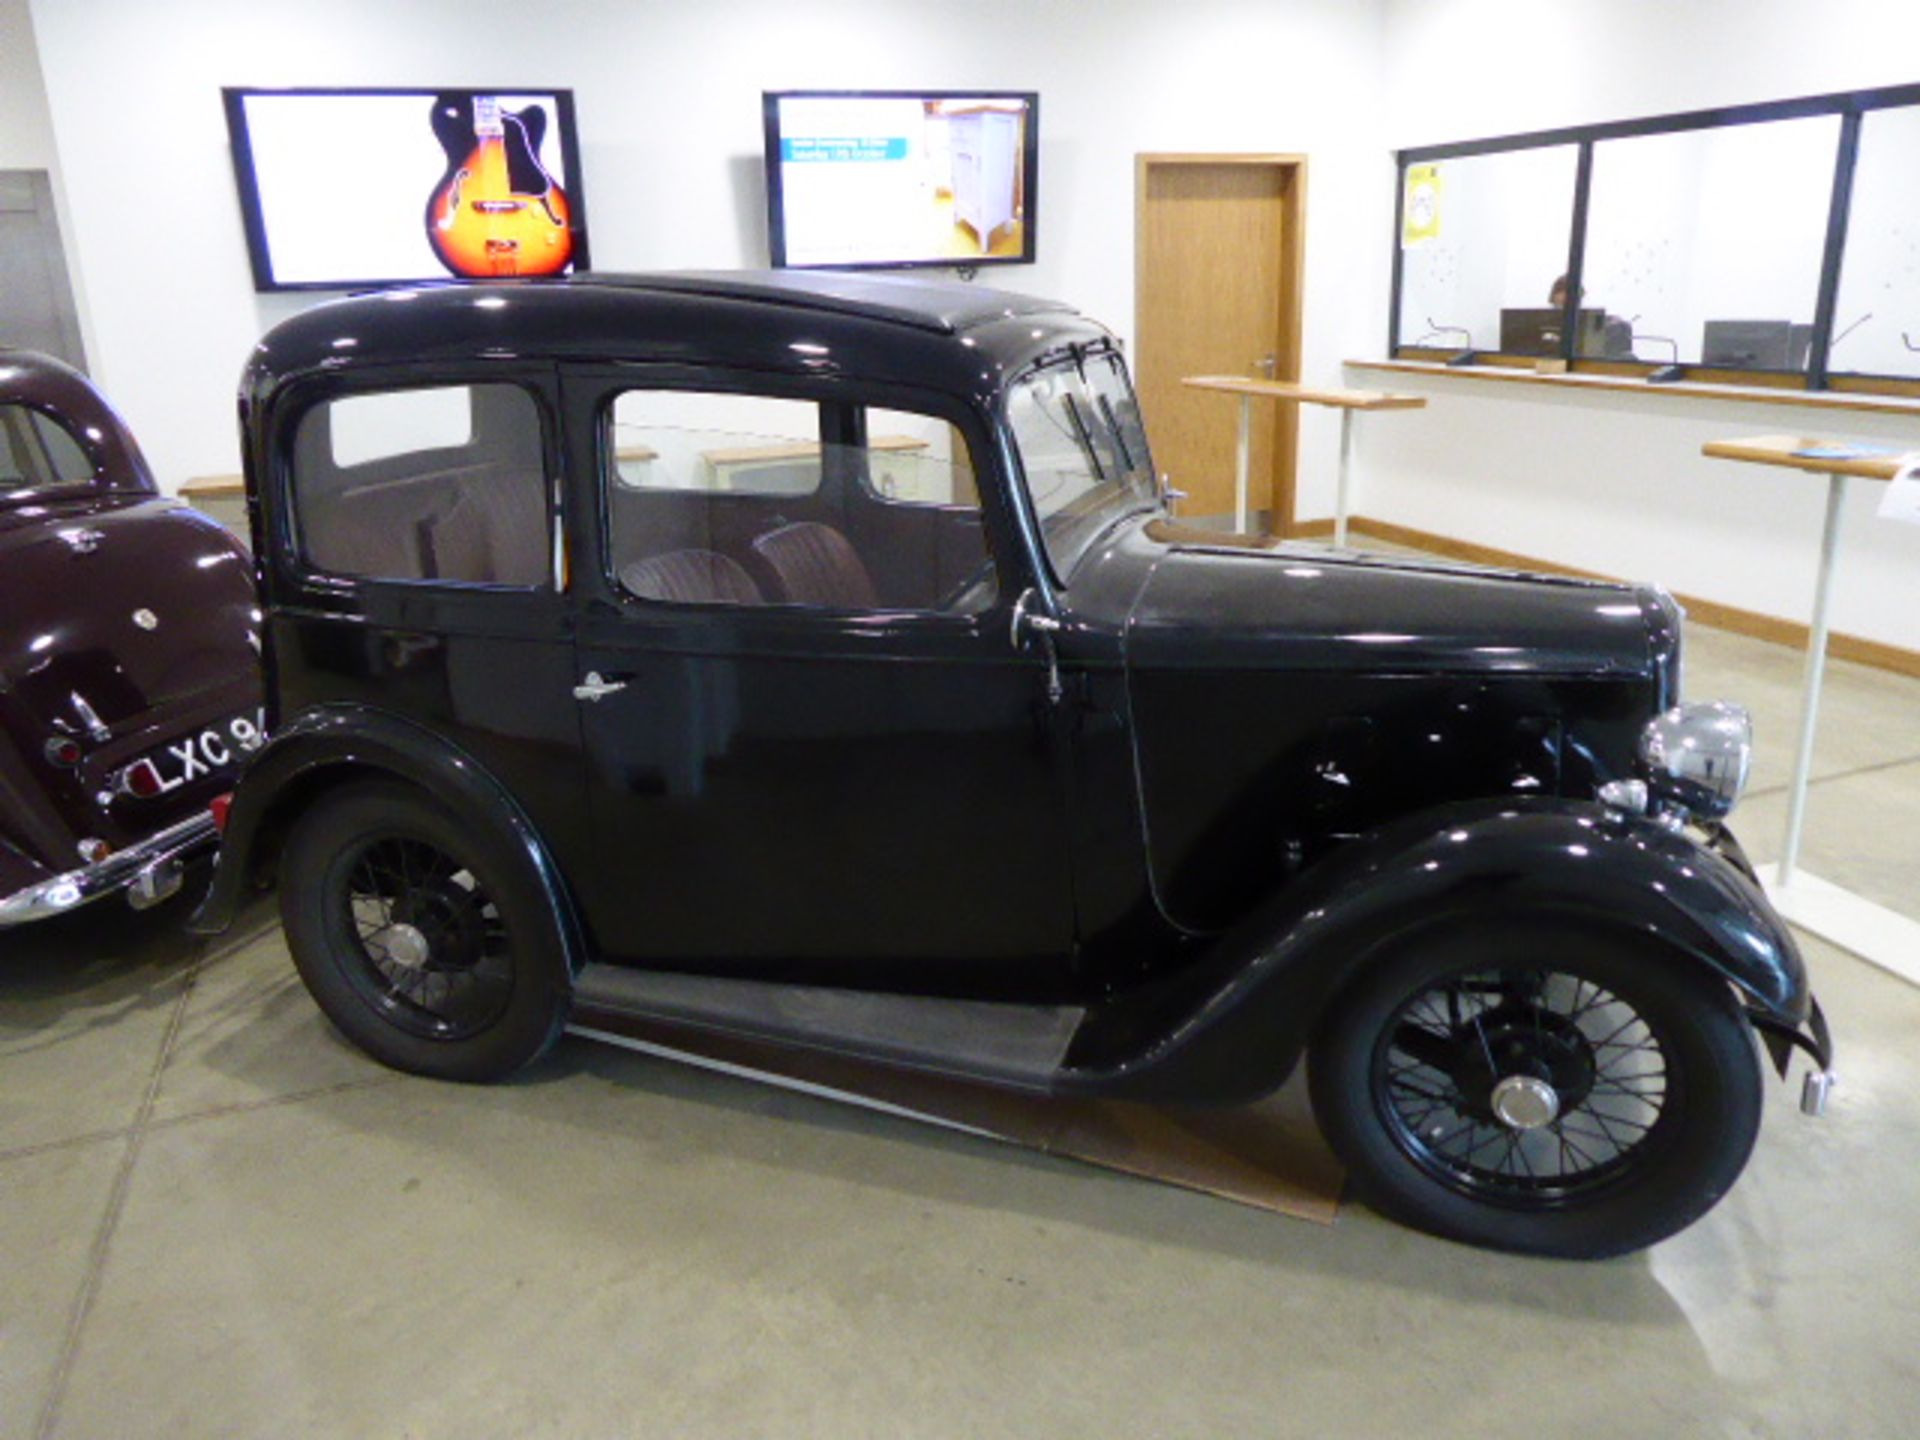 DMB 485 1936 Austin Seven Ruby 2 door saloon in black This car has undergone a complete 'bare metal' - Image 2 of 9